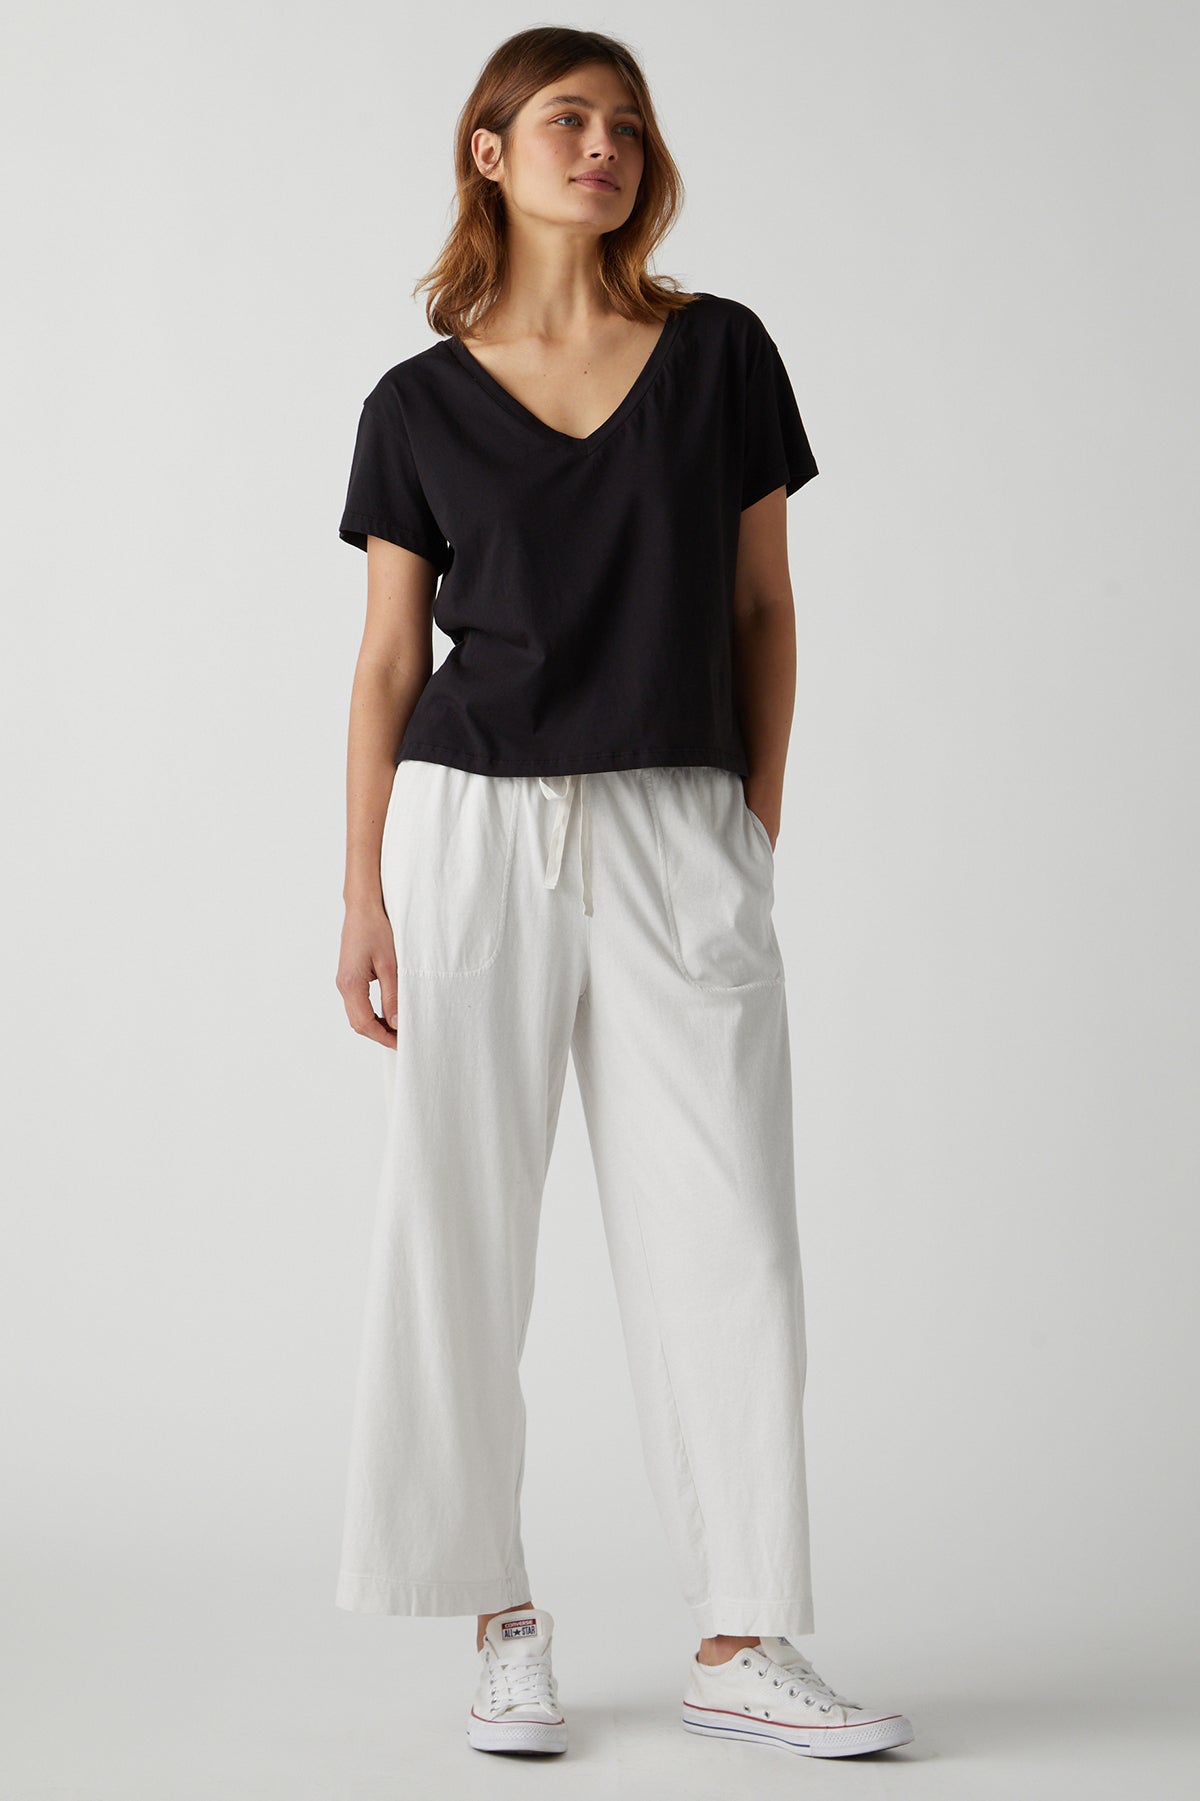 a woman wearing a black t- shirt and Velvet by Jenny Graham PISMO PANT.-26040508776641